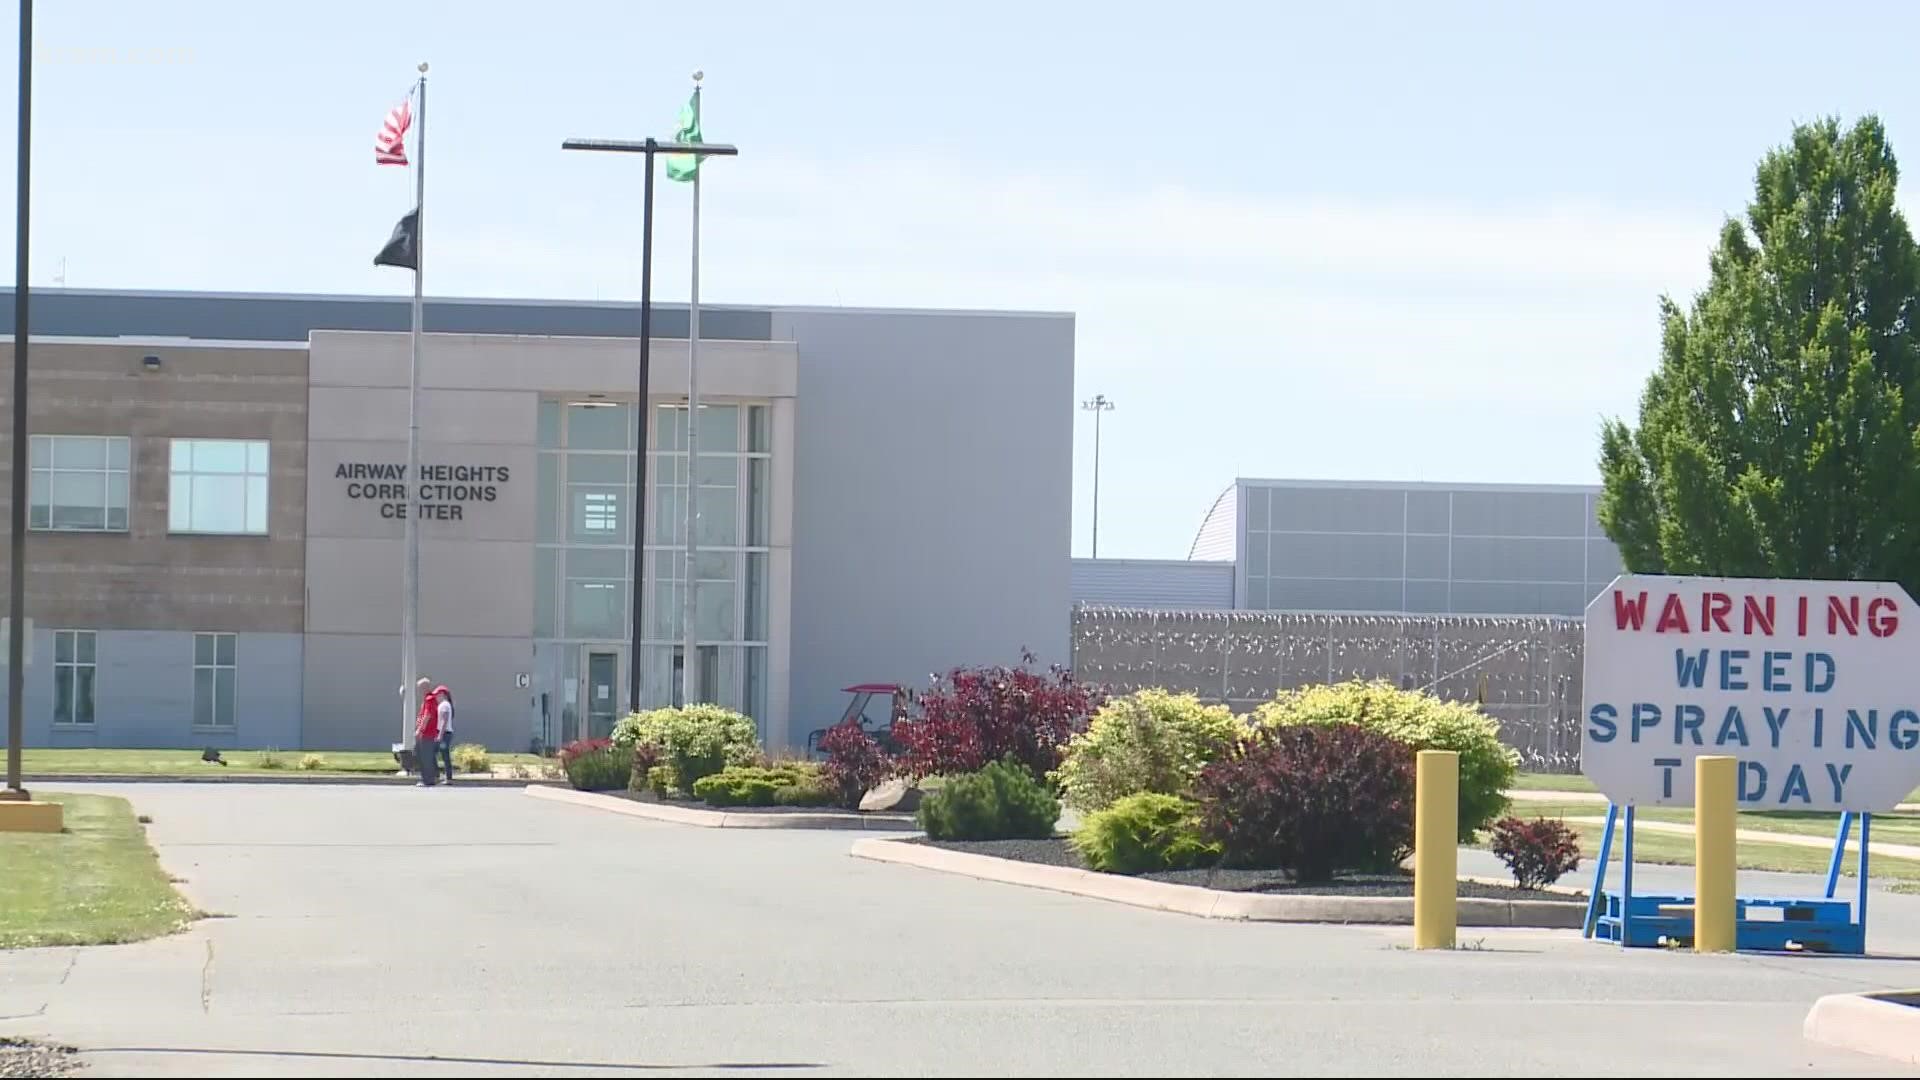 Washington Department of Corrections ended solitary confinement on Sept. 16 to focus on humane treatment of inmates.